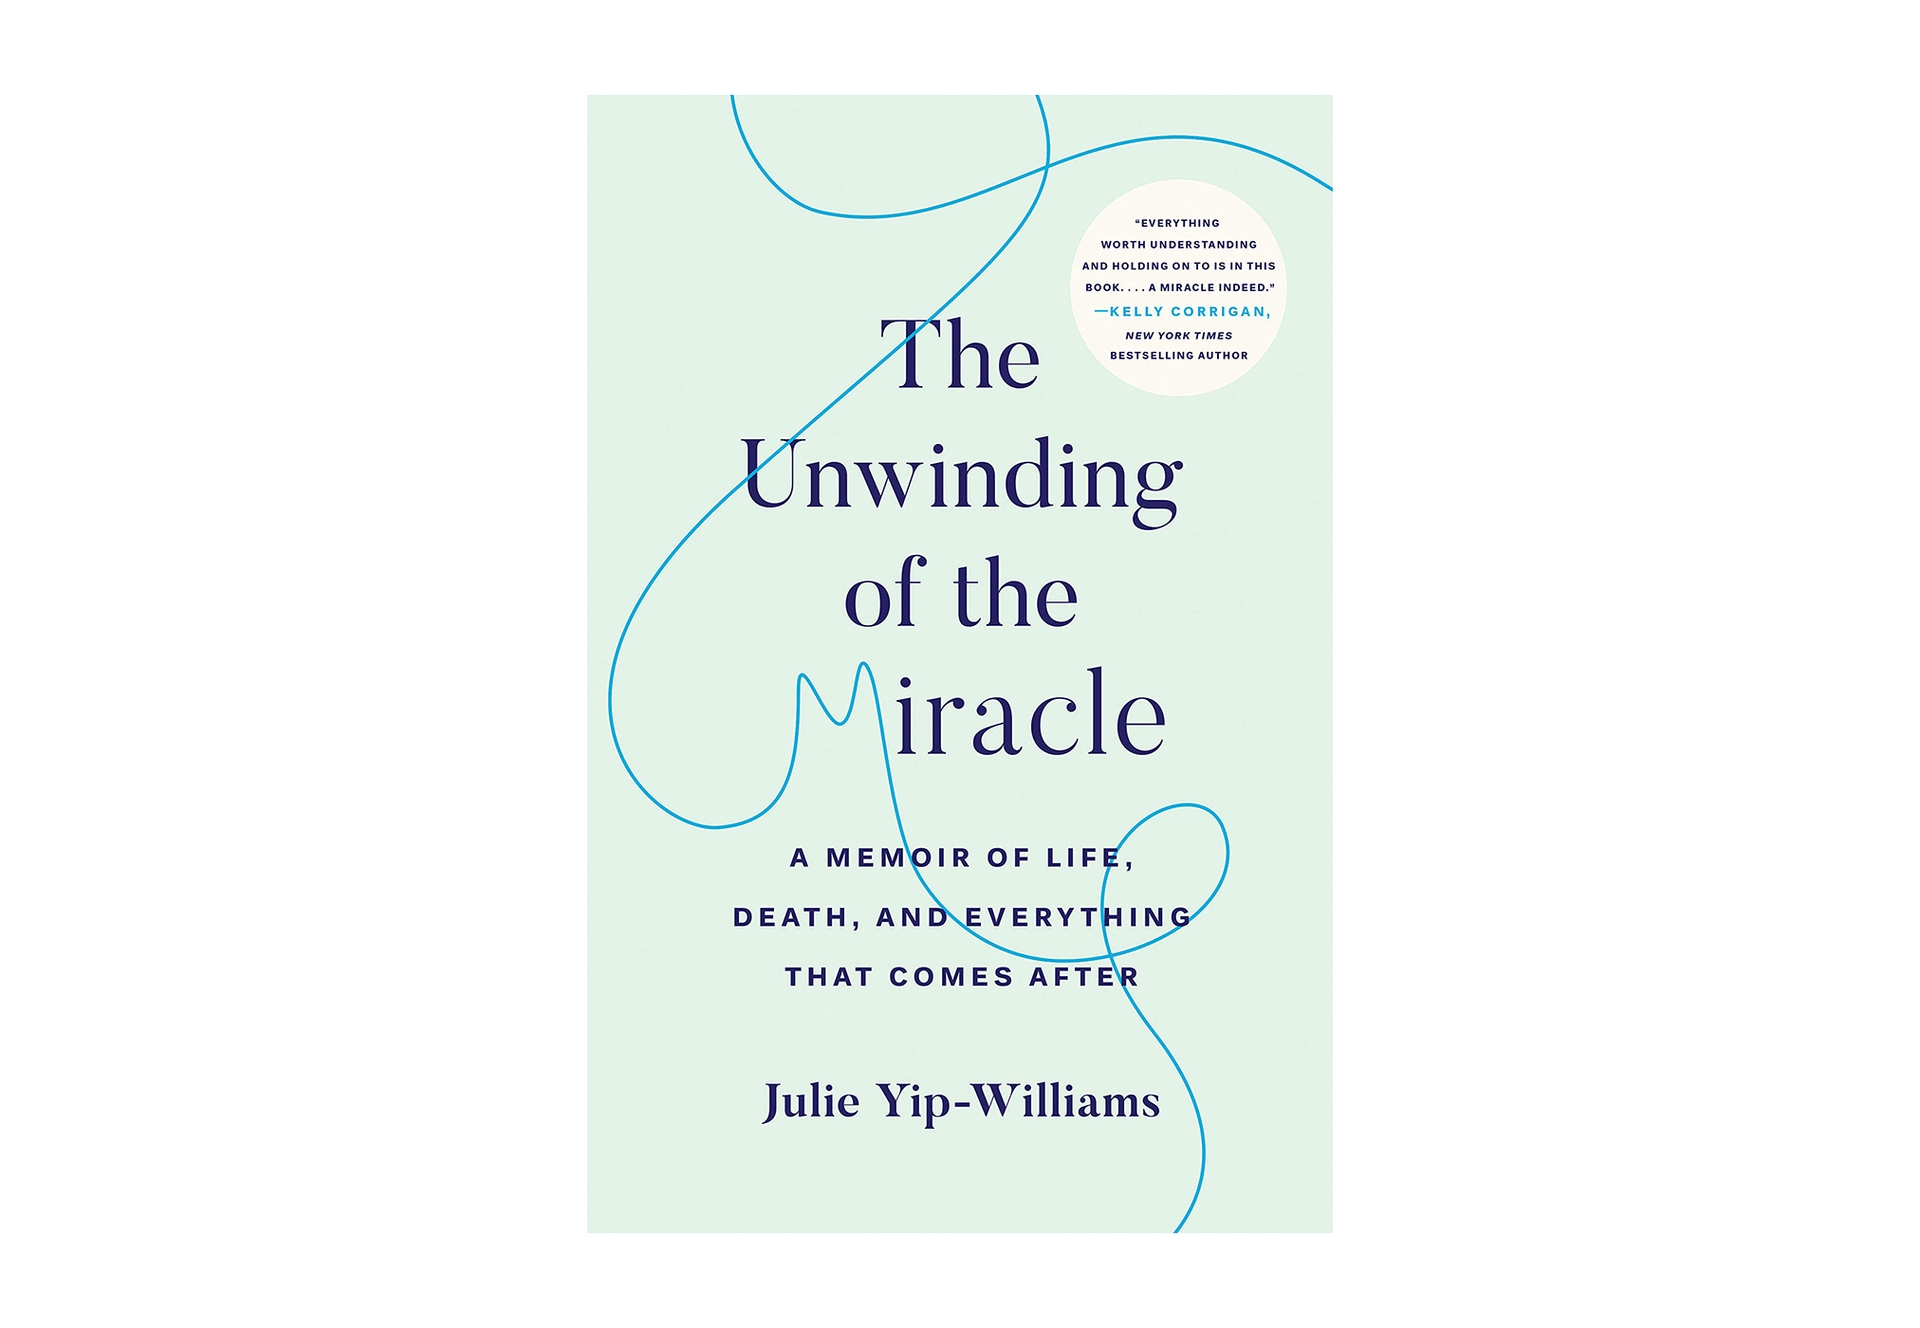 Book cover for "The Unwinding of the Miracle" it shows the text in a serif font in dark blue, on a seafoam background. A thread meanders across the page, creating two loops, and the letter "M" in miracle.